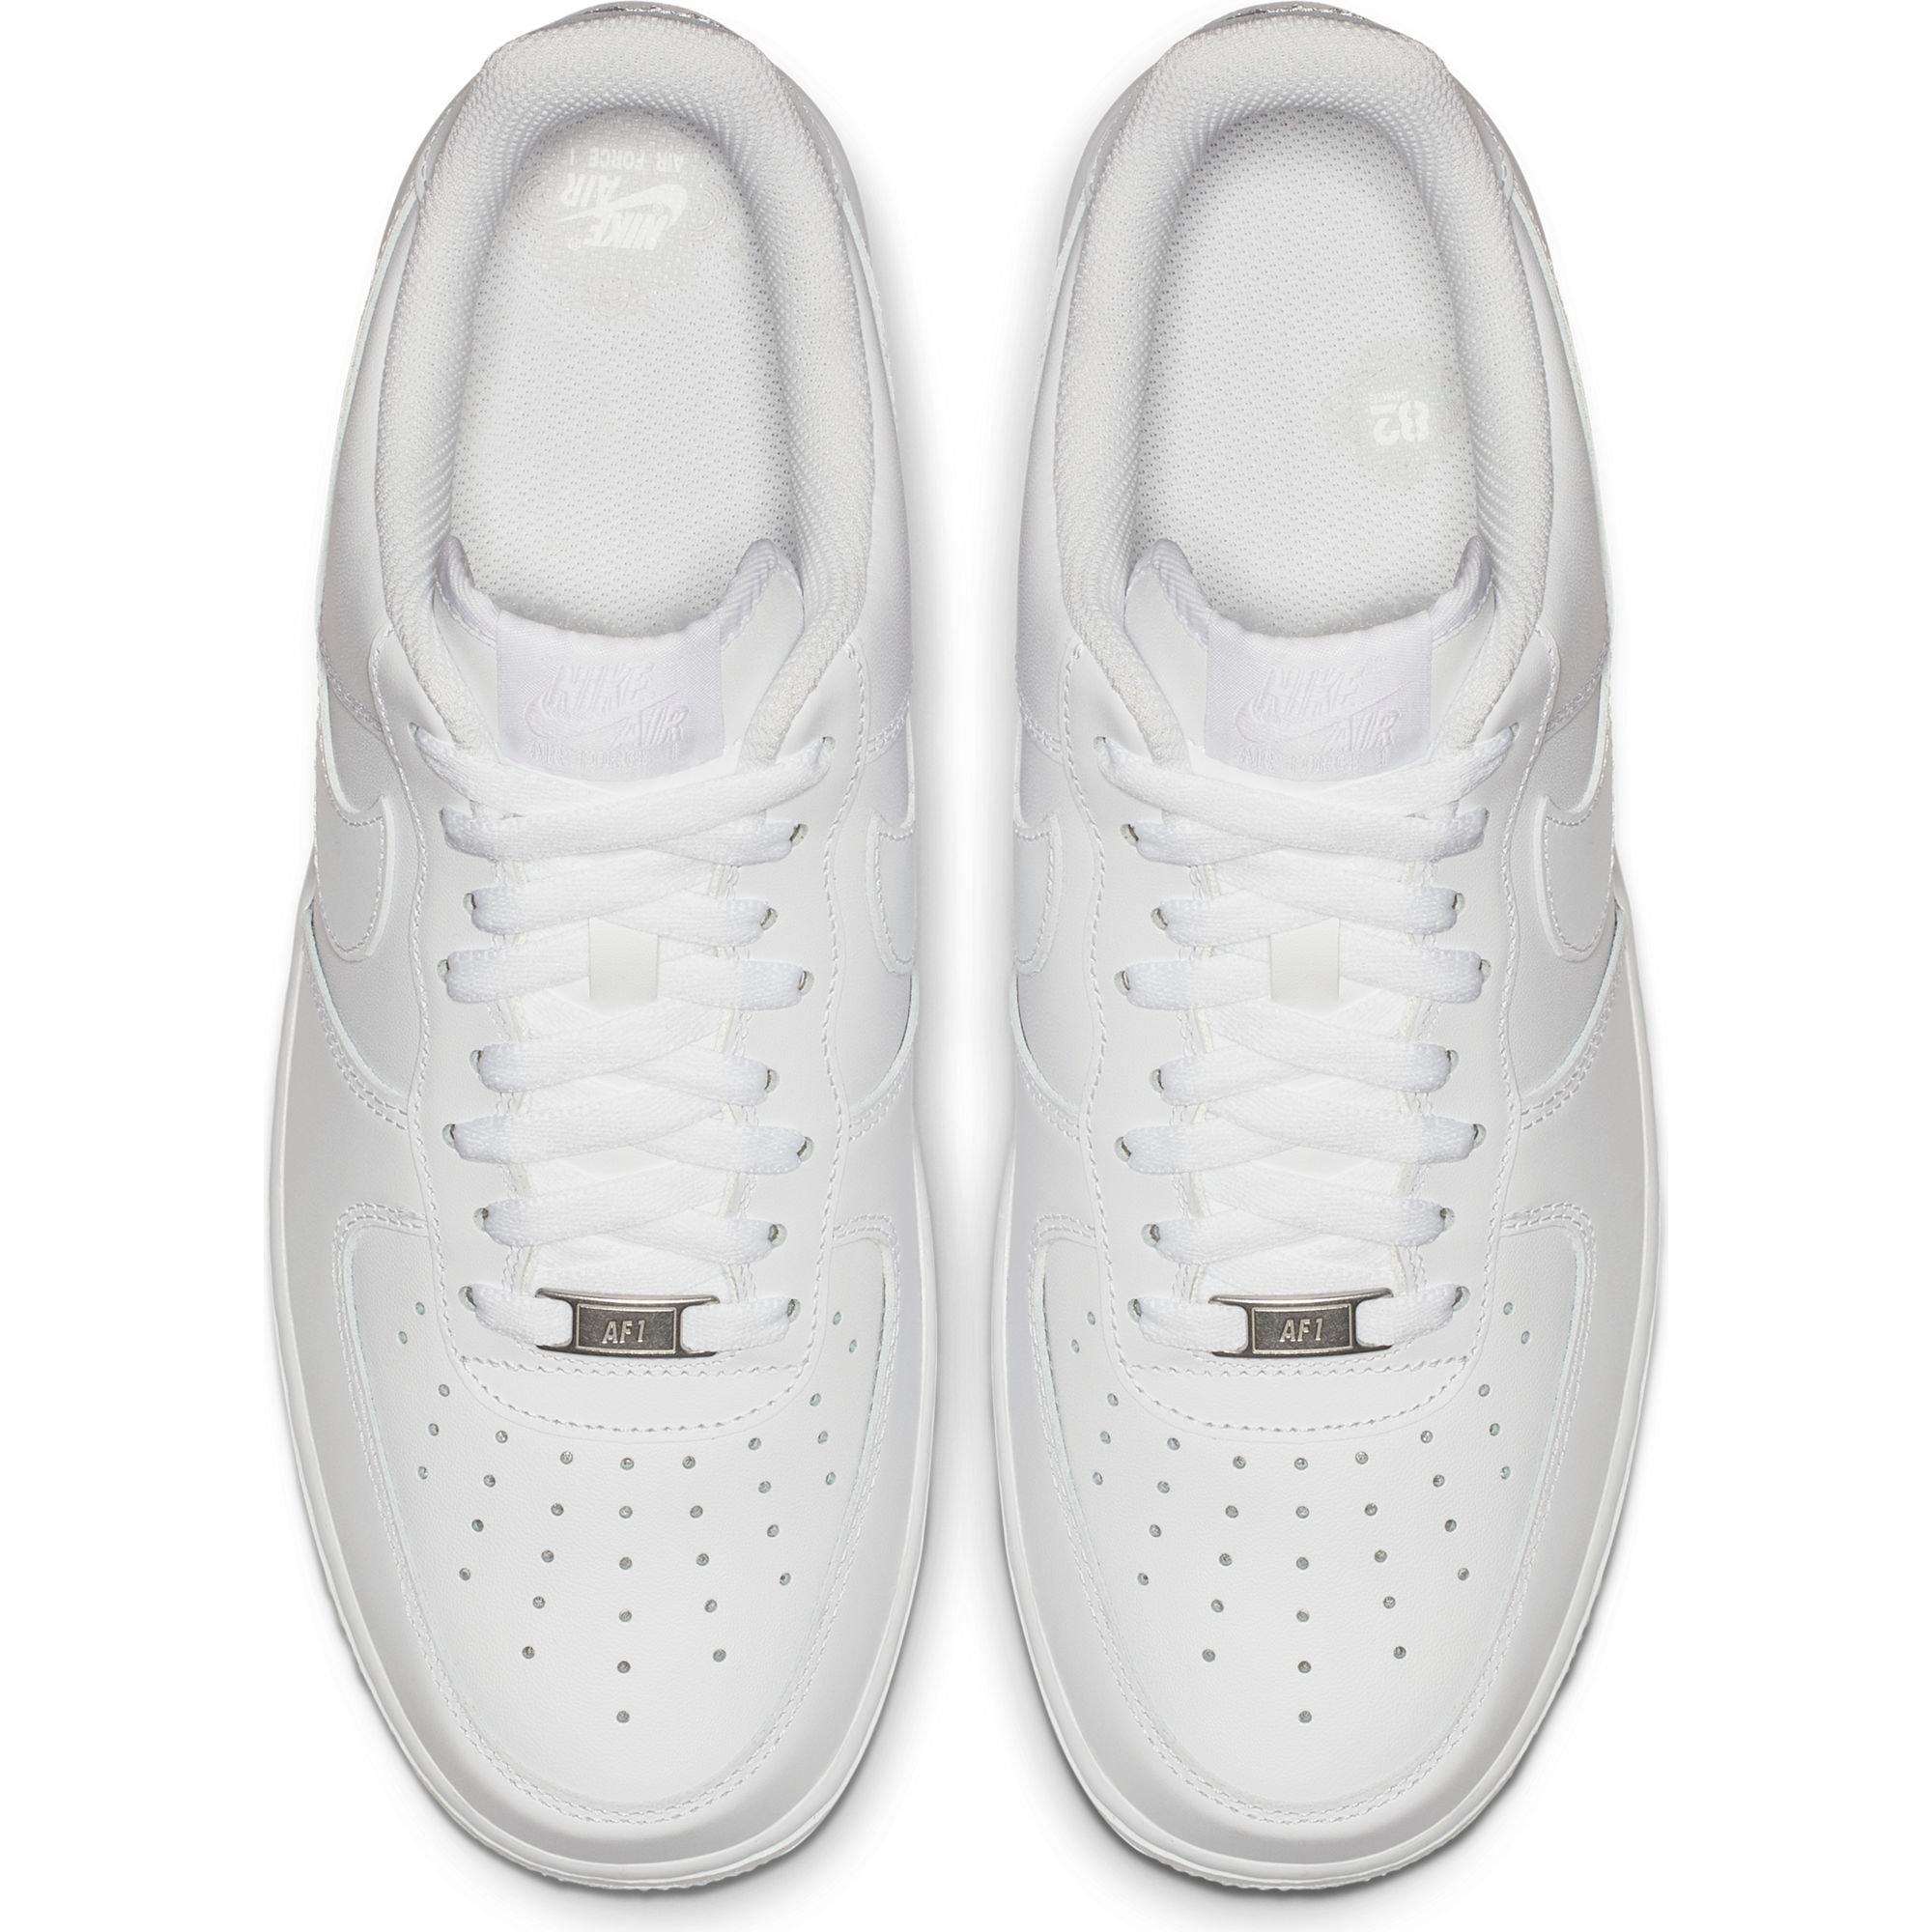 Mens White Air Force 1 Shoes.